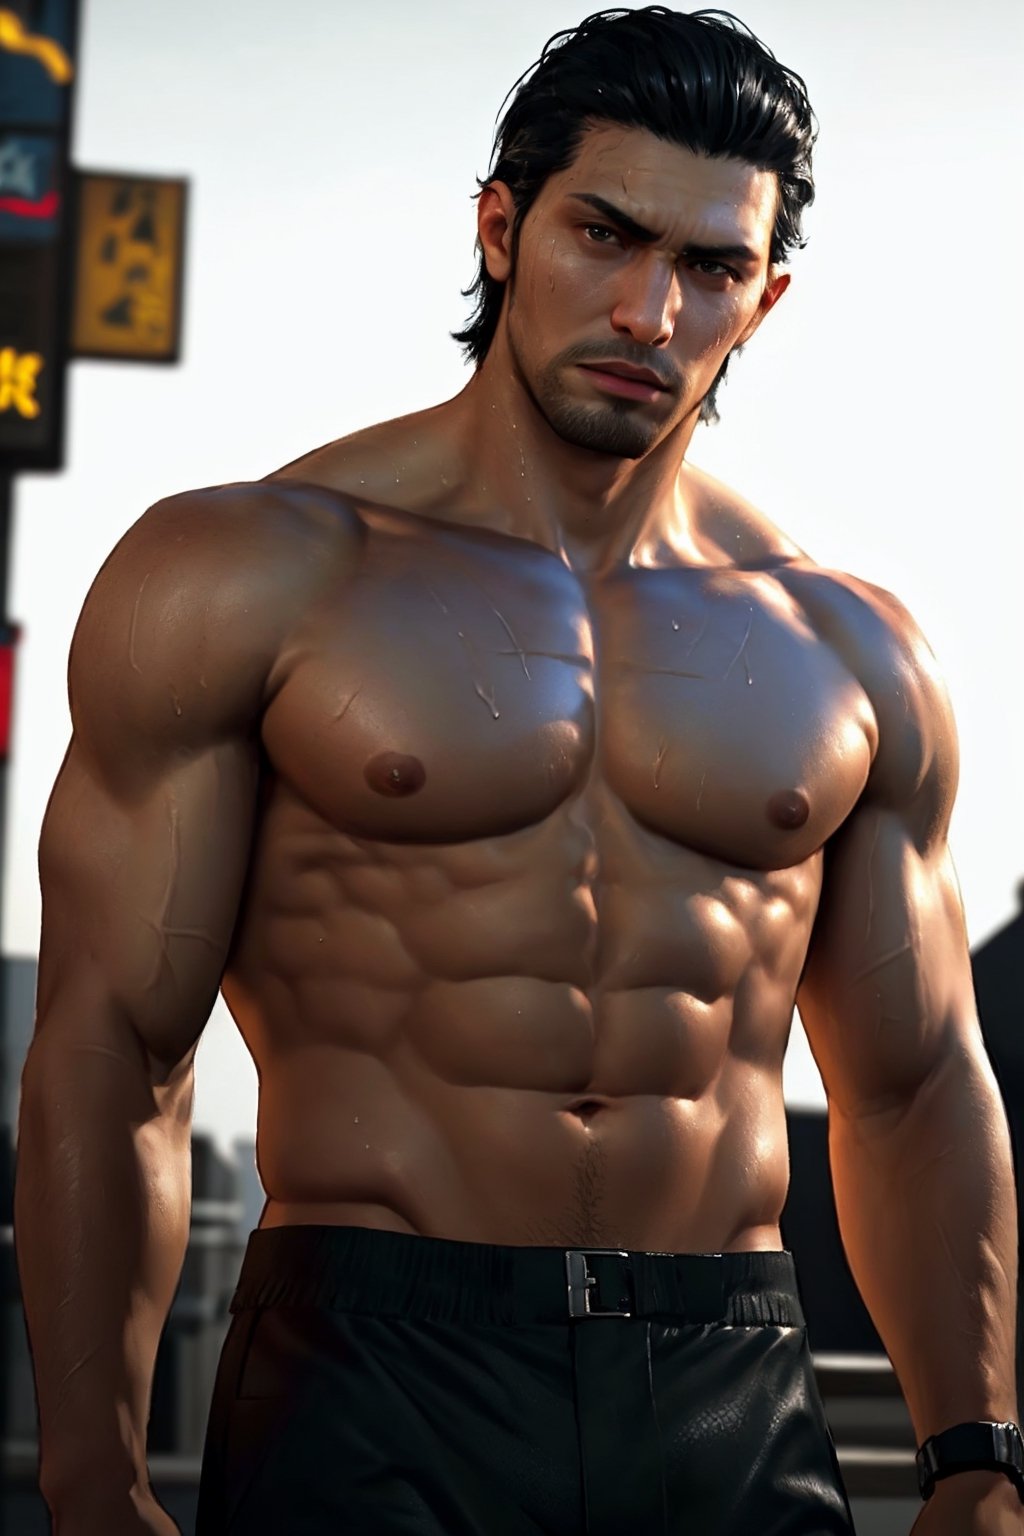 (1 image only), solo male, 1boy, Daigo Dojima, Yakuza, 34 years old, Asian, Japanese, black hair,  short hair, slicked back hair, stubble, handsome,  (topless, shirtless), (black pants), fit body, sweaty skin, shiny skin, mature, manly, hunk, masculine, virile, confidence, charming, alluring, upper body in frame, night at Kabukicho Tokyo, perfect anatomy, perfect proportions, 8k, HQ, (best quality:1.5, hyperrealistic:1.5, photorealistic:1.4, madly detailed CG unity 8k wallpaper:1.5, masterpiece:1.3, madly detailed photo:1.2), (hyper-realistic lifelike texture:1.4, realistic eyes:1.2), high_resolution, picture-perfect face, perfect eye pupil, detailed eyes,  perfecteyes, perfecteyes, dutch angle,realistic,photorealistic